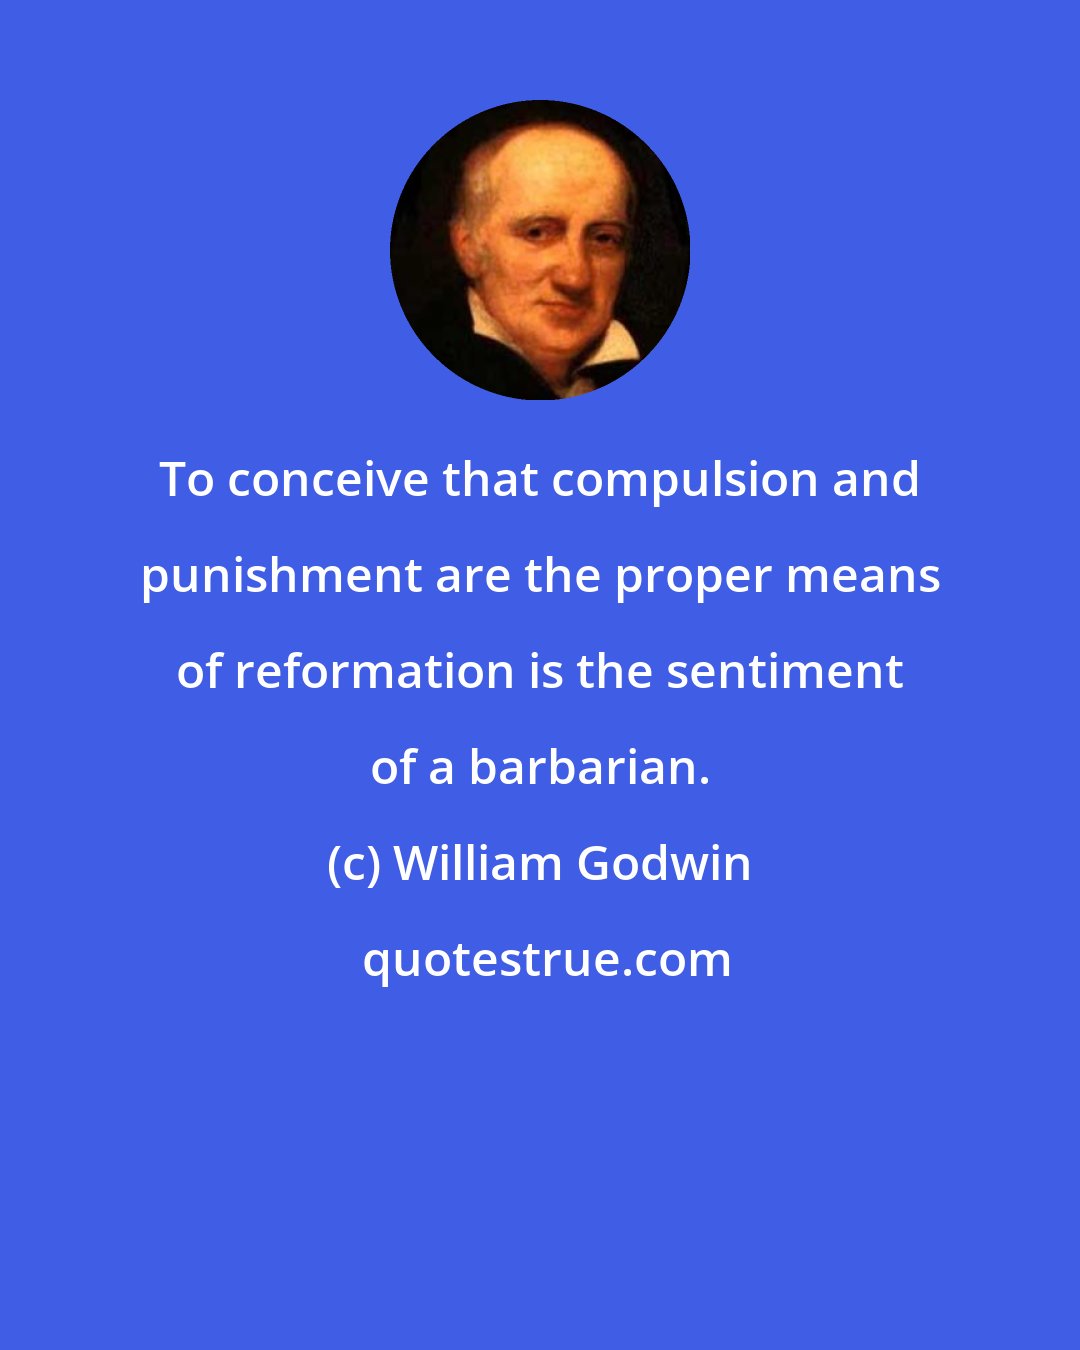 William Godwin: To conceive that compulsion and punishment are the proper means of reformation is the sentiment of a barbarian.